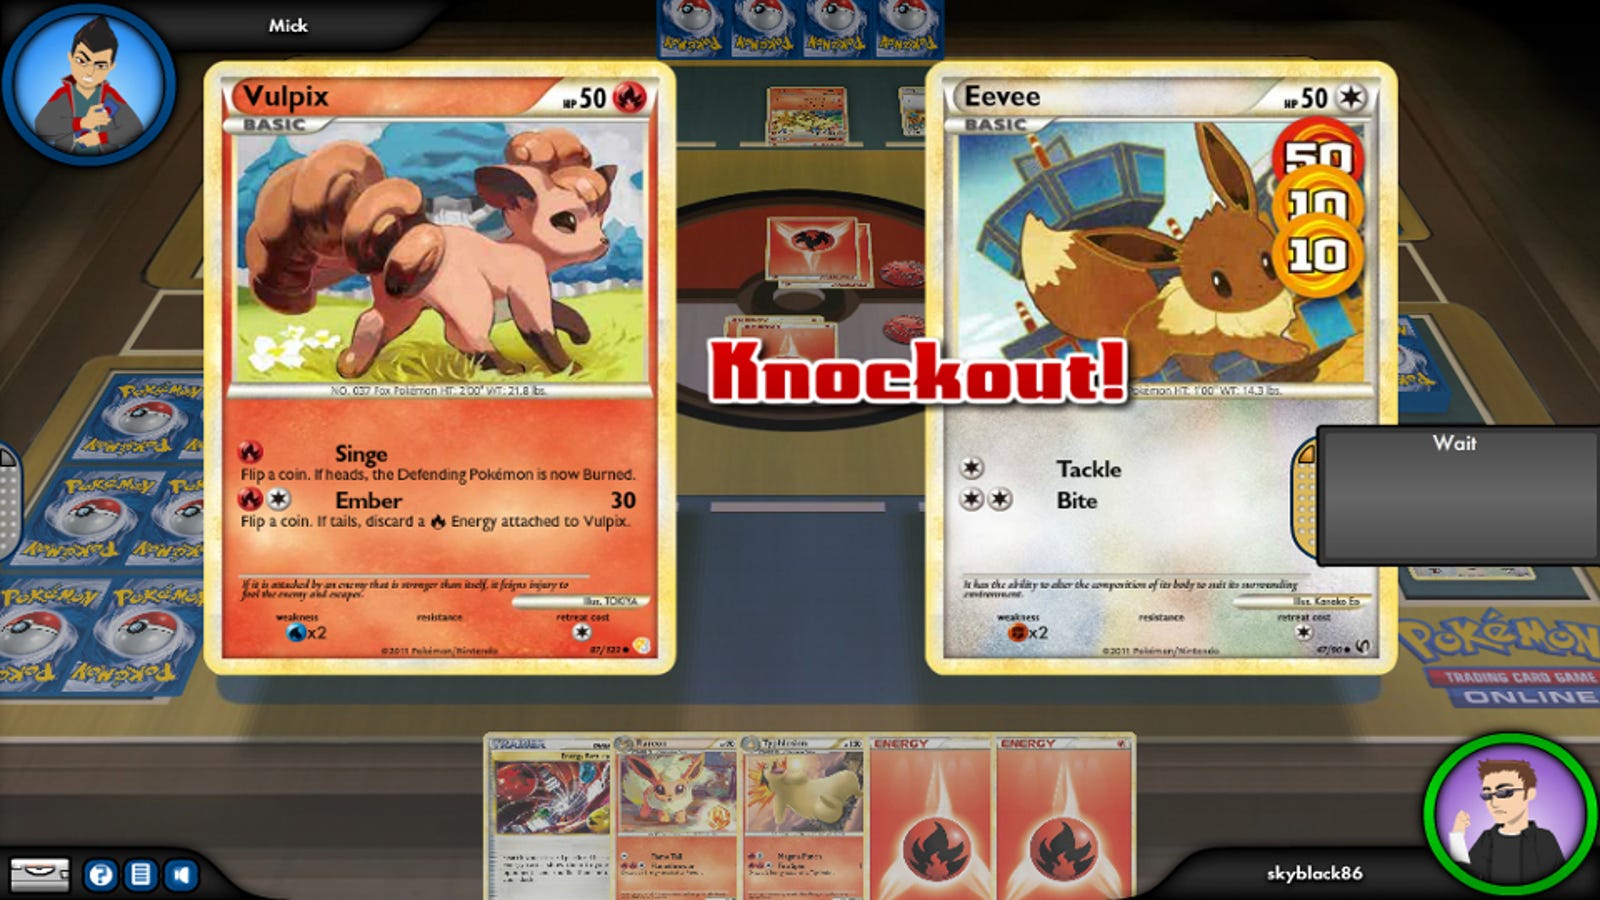 Official Pokémon Card Game For Ipad Just Launched On